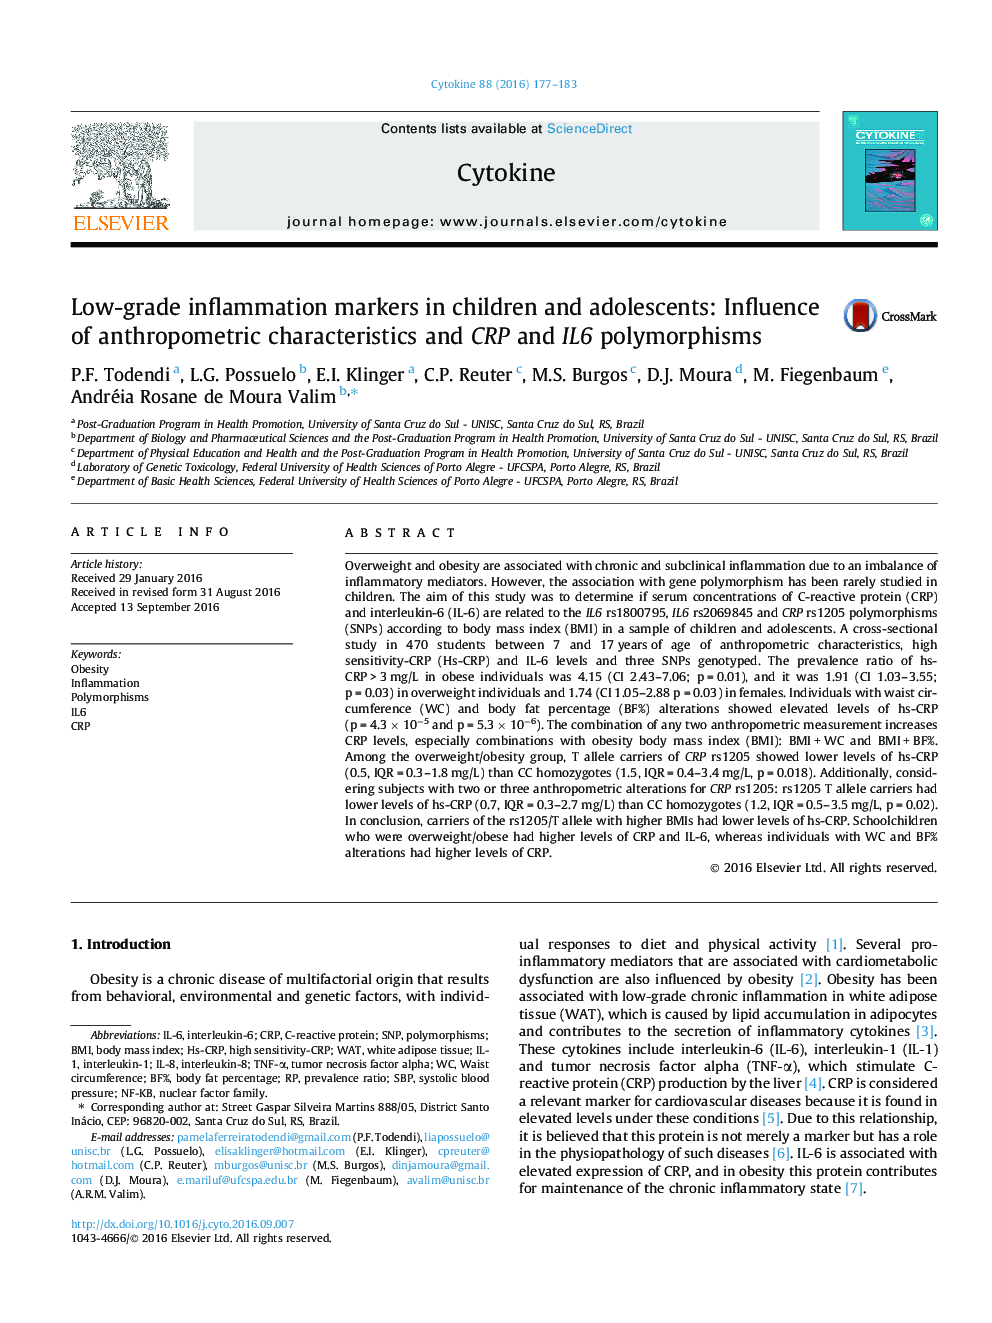 Low-grade inflammation markers in children and adolescents: Influence of anthropometric characteristics and CRP and IL6 polymorphisms